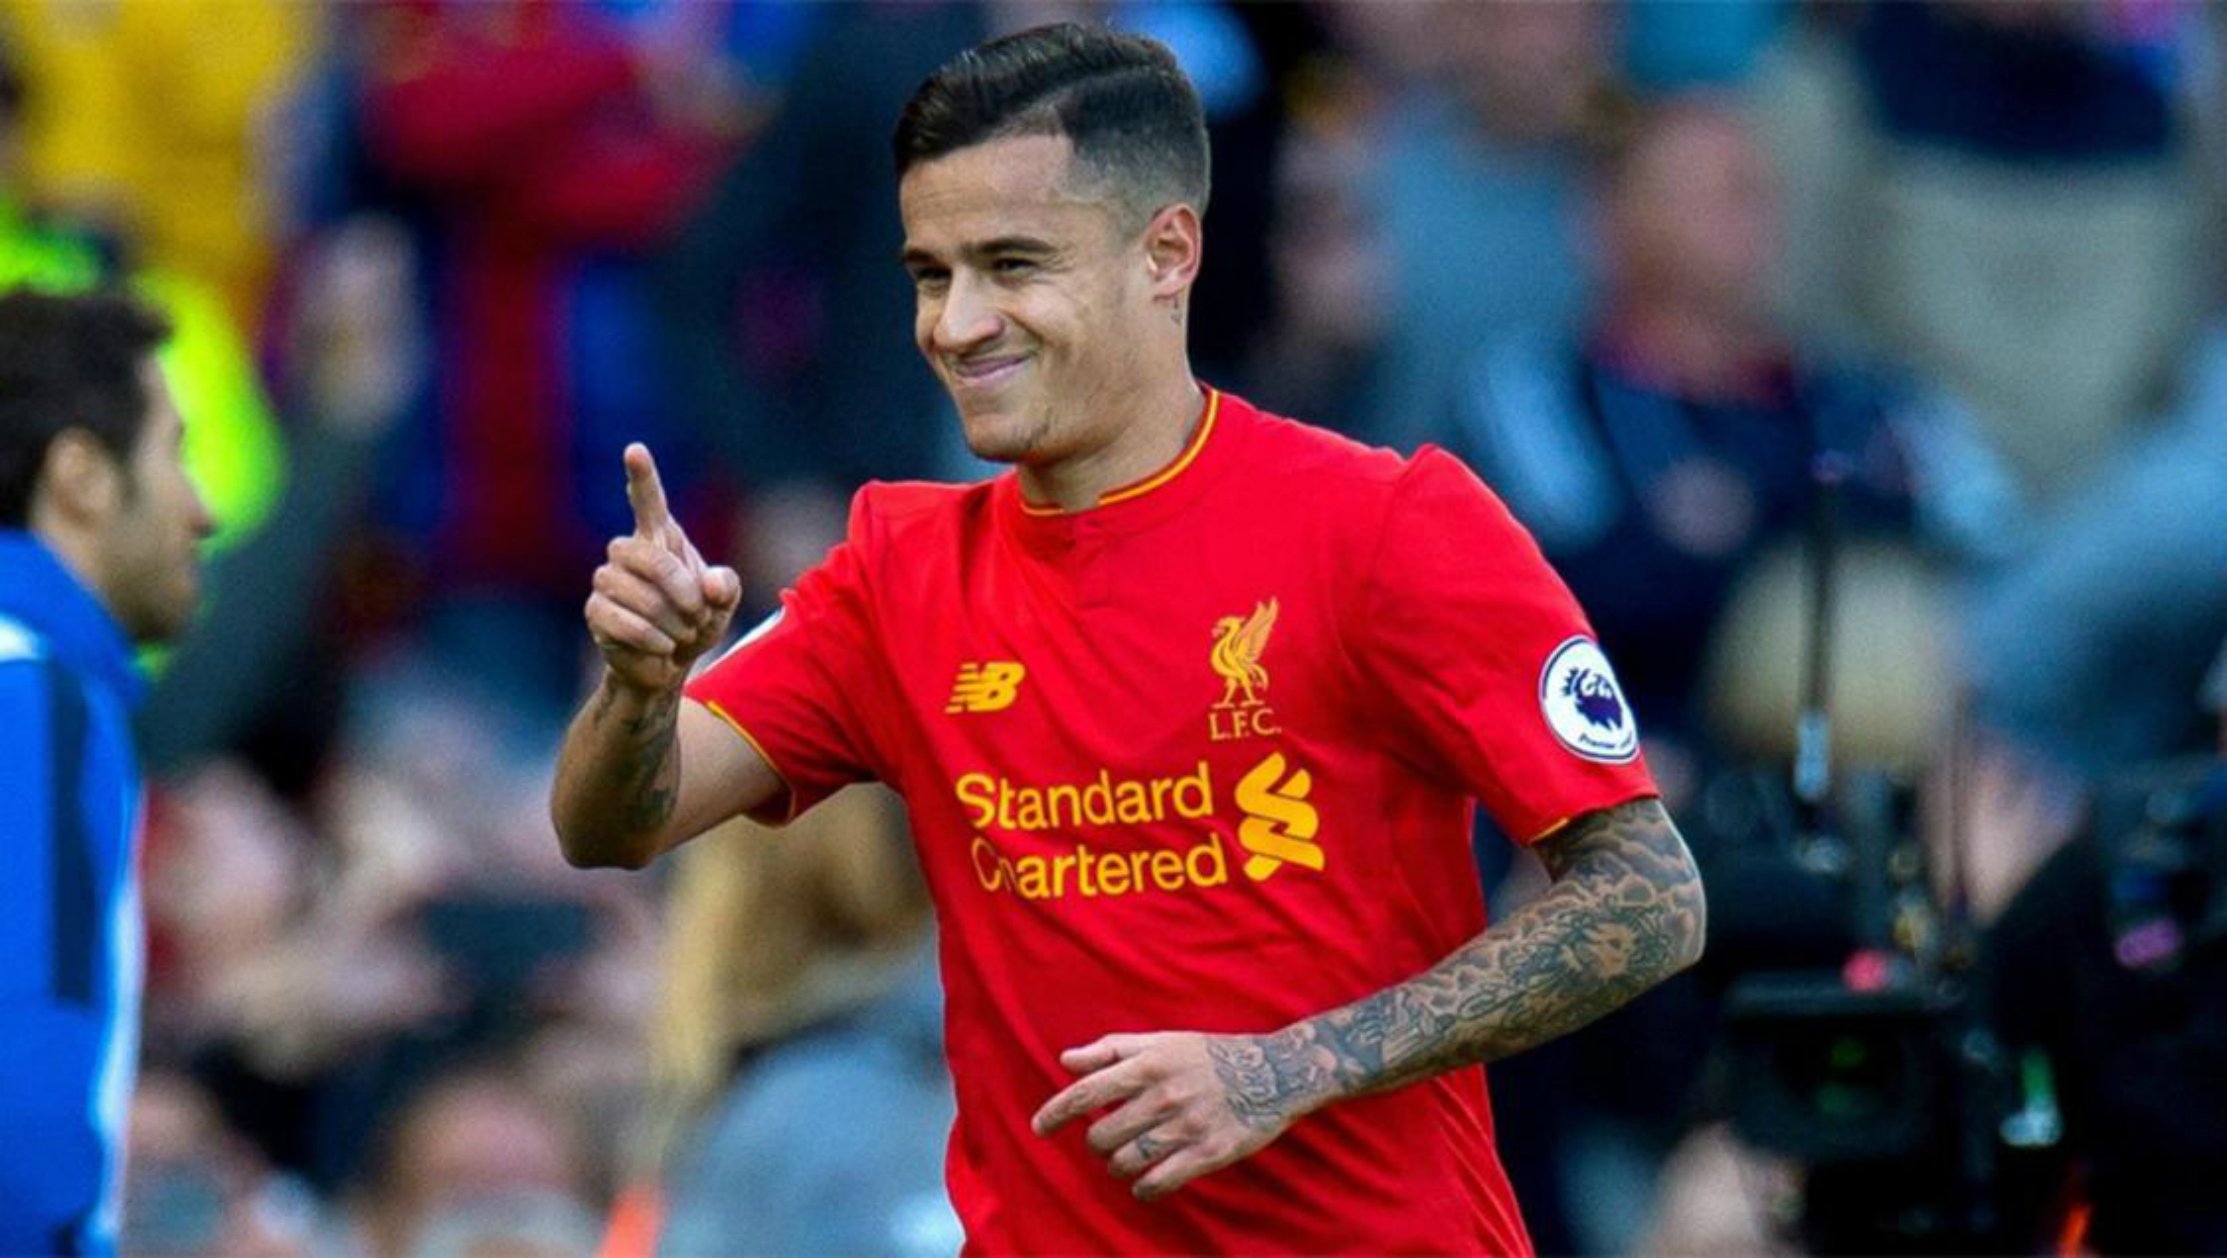 Liverpool won't accept any offers for Coutinho but the player wants to leave